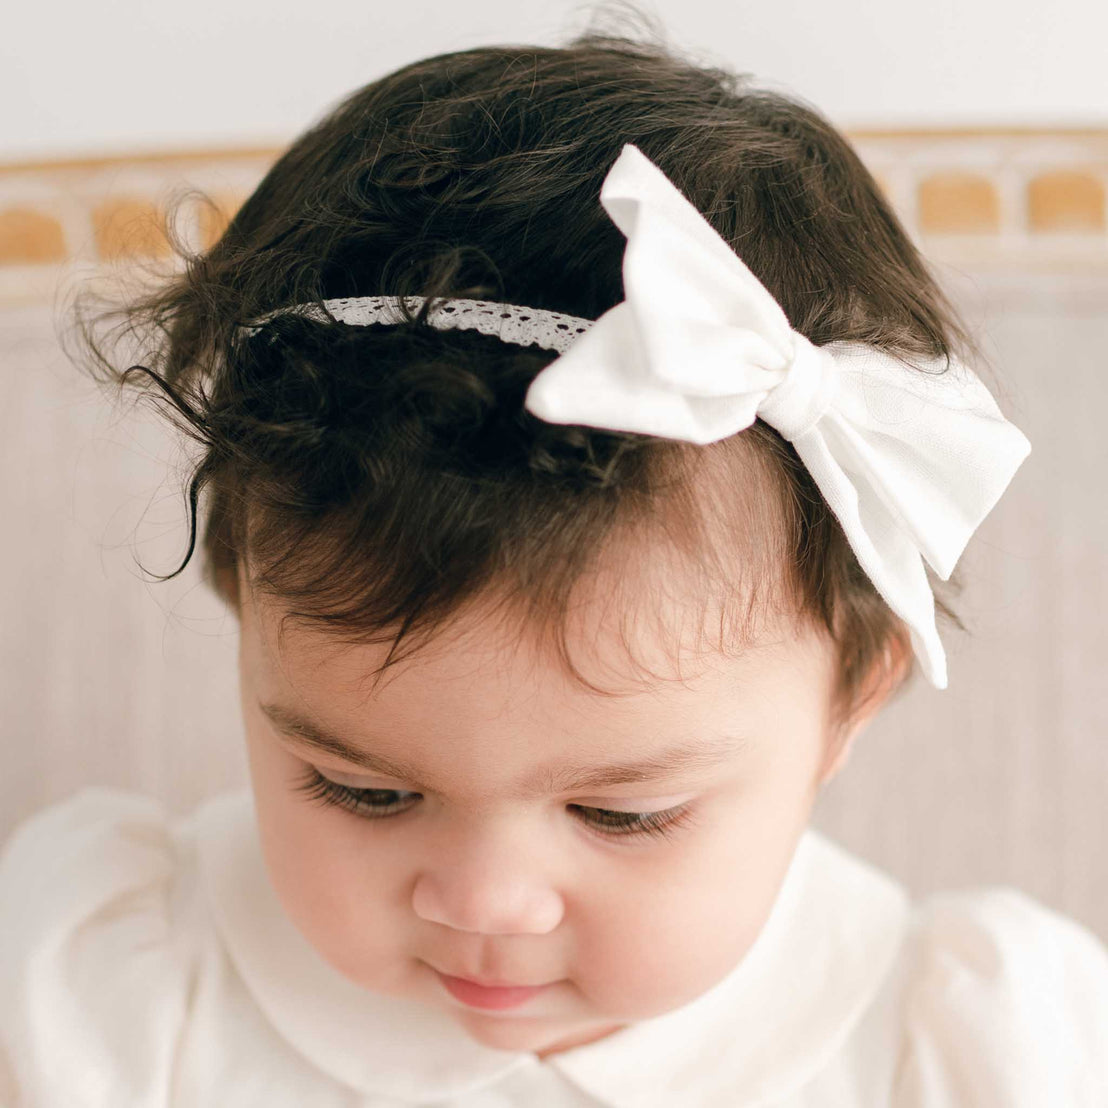 A close-up portrait of a toddler with curly hair, dressed in a white boutique outfit for a baptism, looking down thoughtfully wearing the Emma Linen Bow Headband.